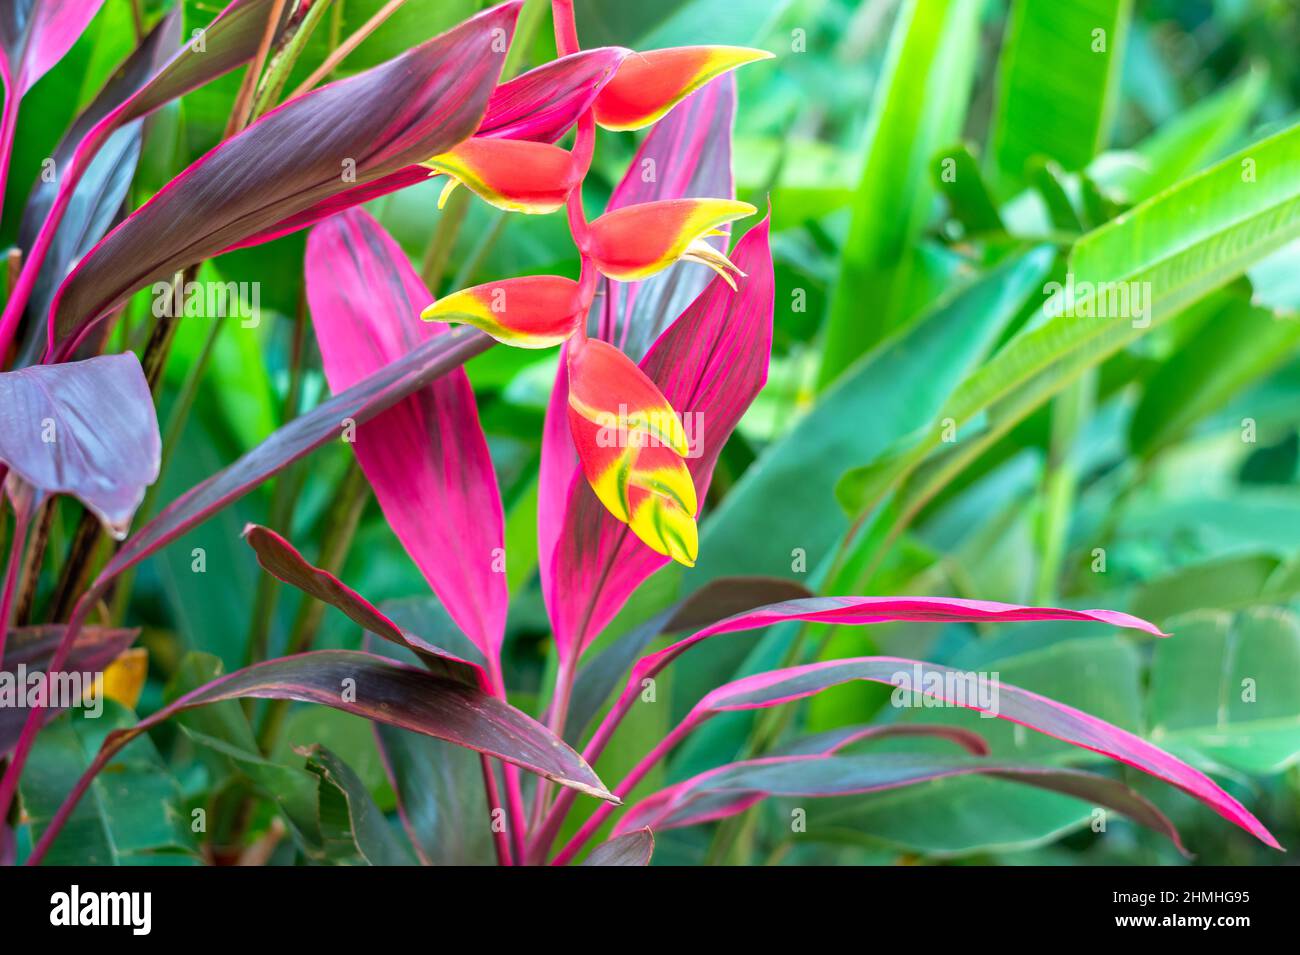 Lush tropical foliage and a lobster claw Heliconia flower in a garden. Stock Photo